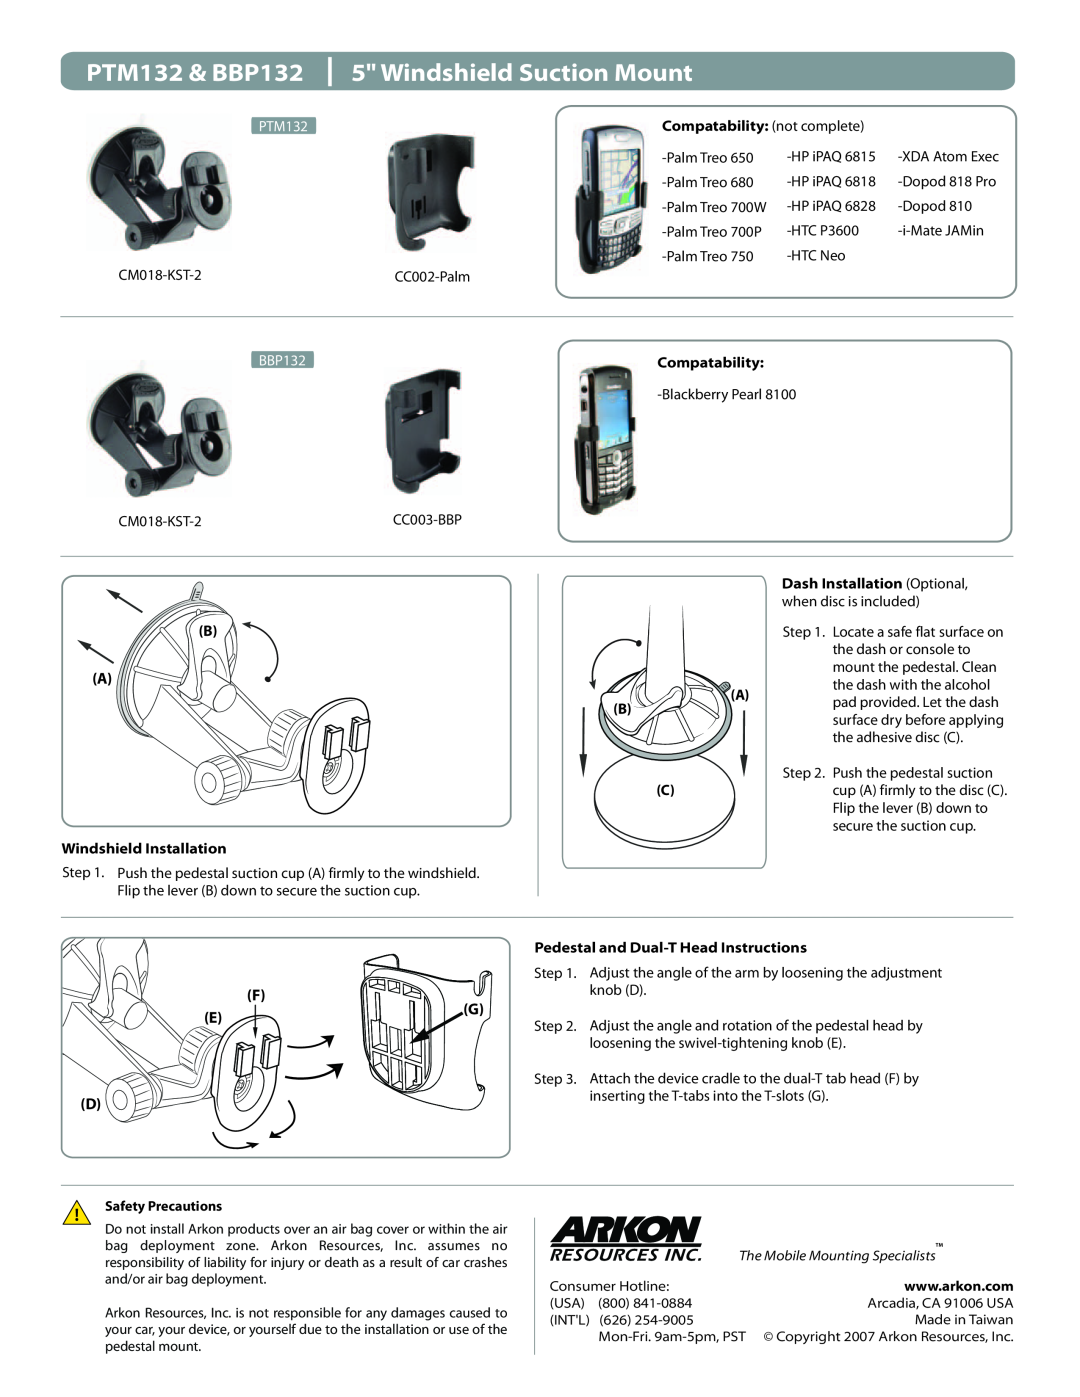 Arkon manual PTM132 & BBP132, Windshield Suction Mount, Compatability not complete, Windshield Installation, Intl 